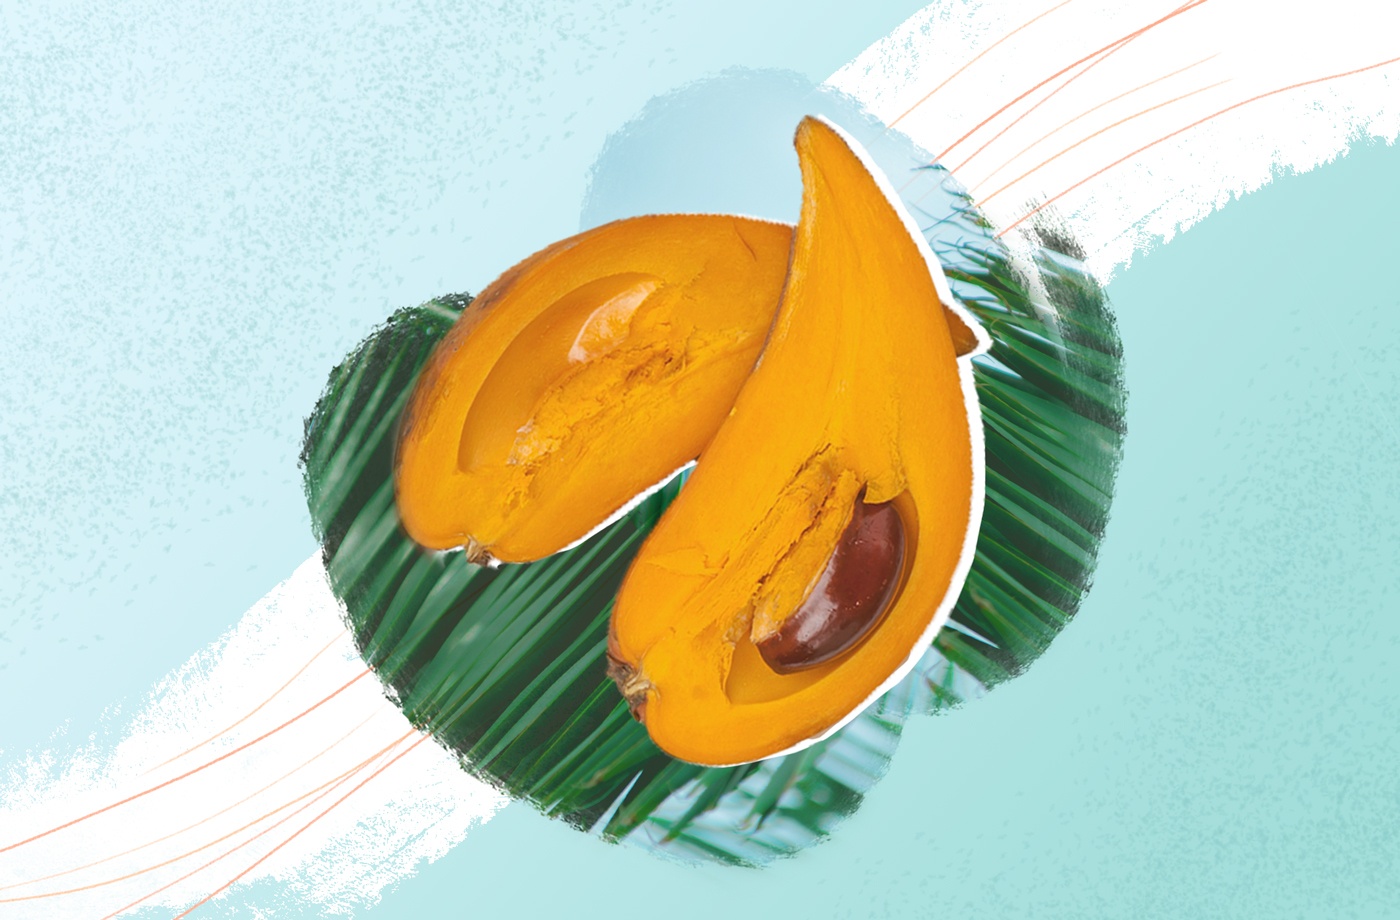 Lucuma fruit could be the next it-superfood